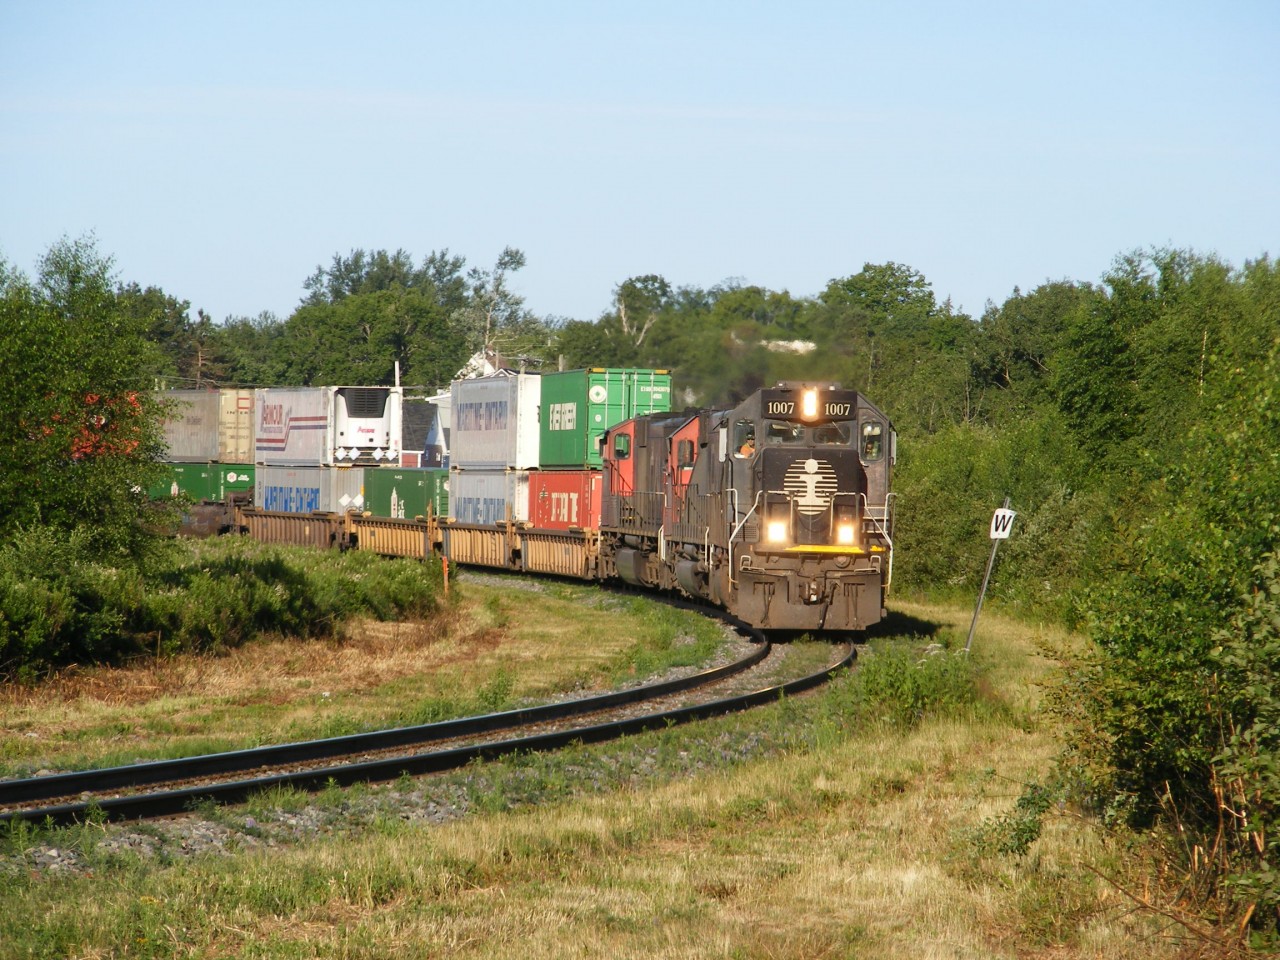 An Illinois Central SD70 locomotive leads CN train Q120 from Toronto, ON to Halifax, NS through the University town of Sackville, NB.